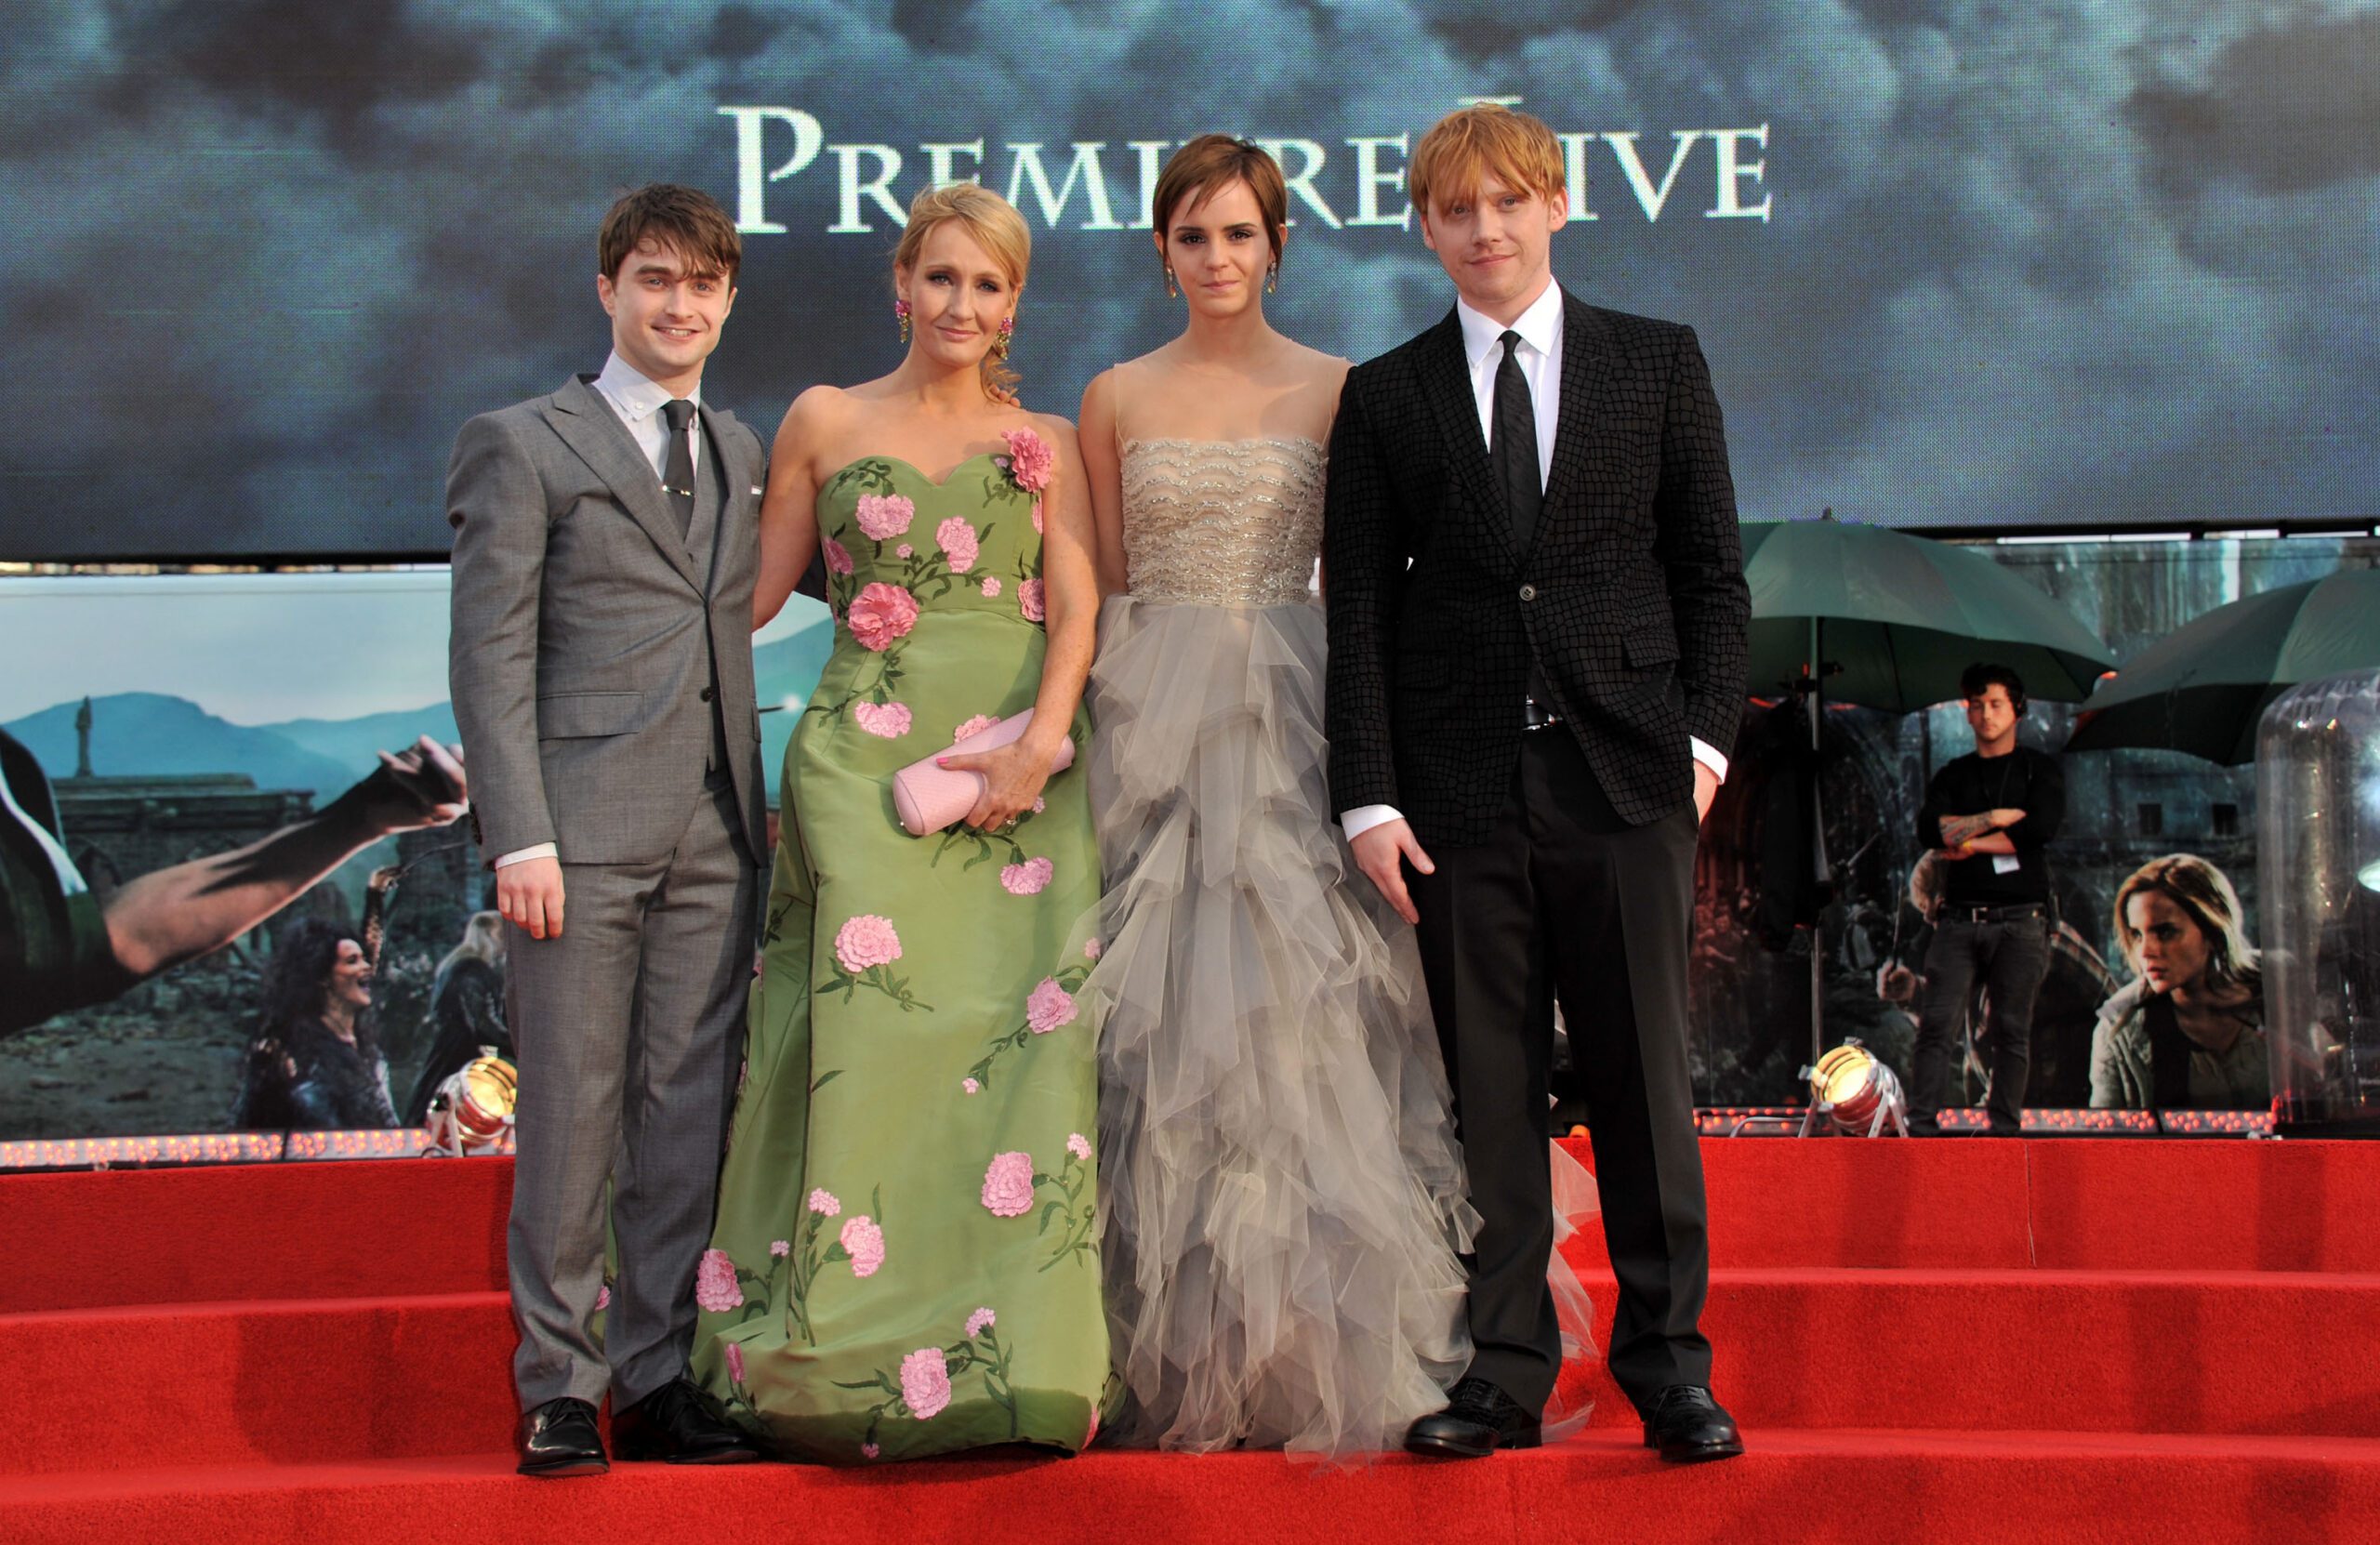 jk-rowling-vs.-the-trans-agenda:-here’s-what-‘harry-potter’-cast-members-have-said-about-the-ongoing-battle